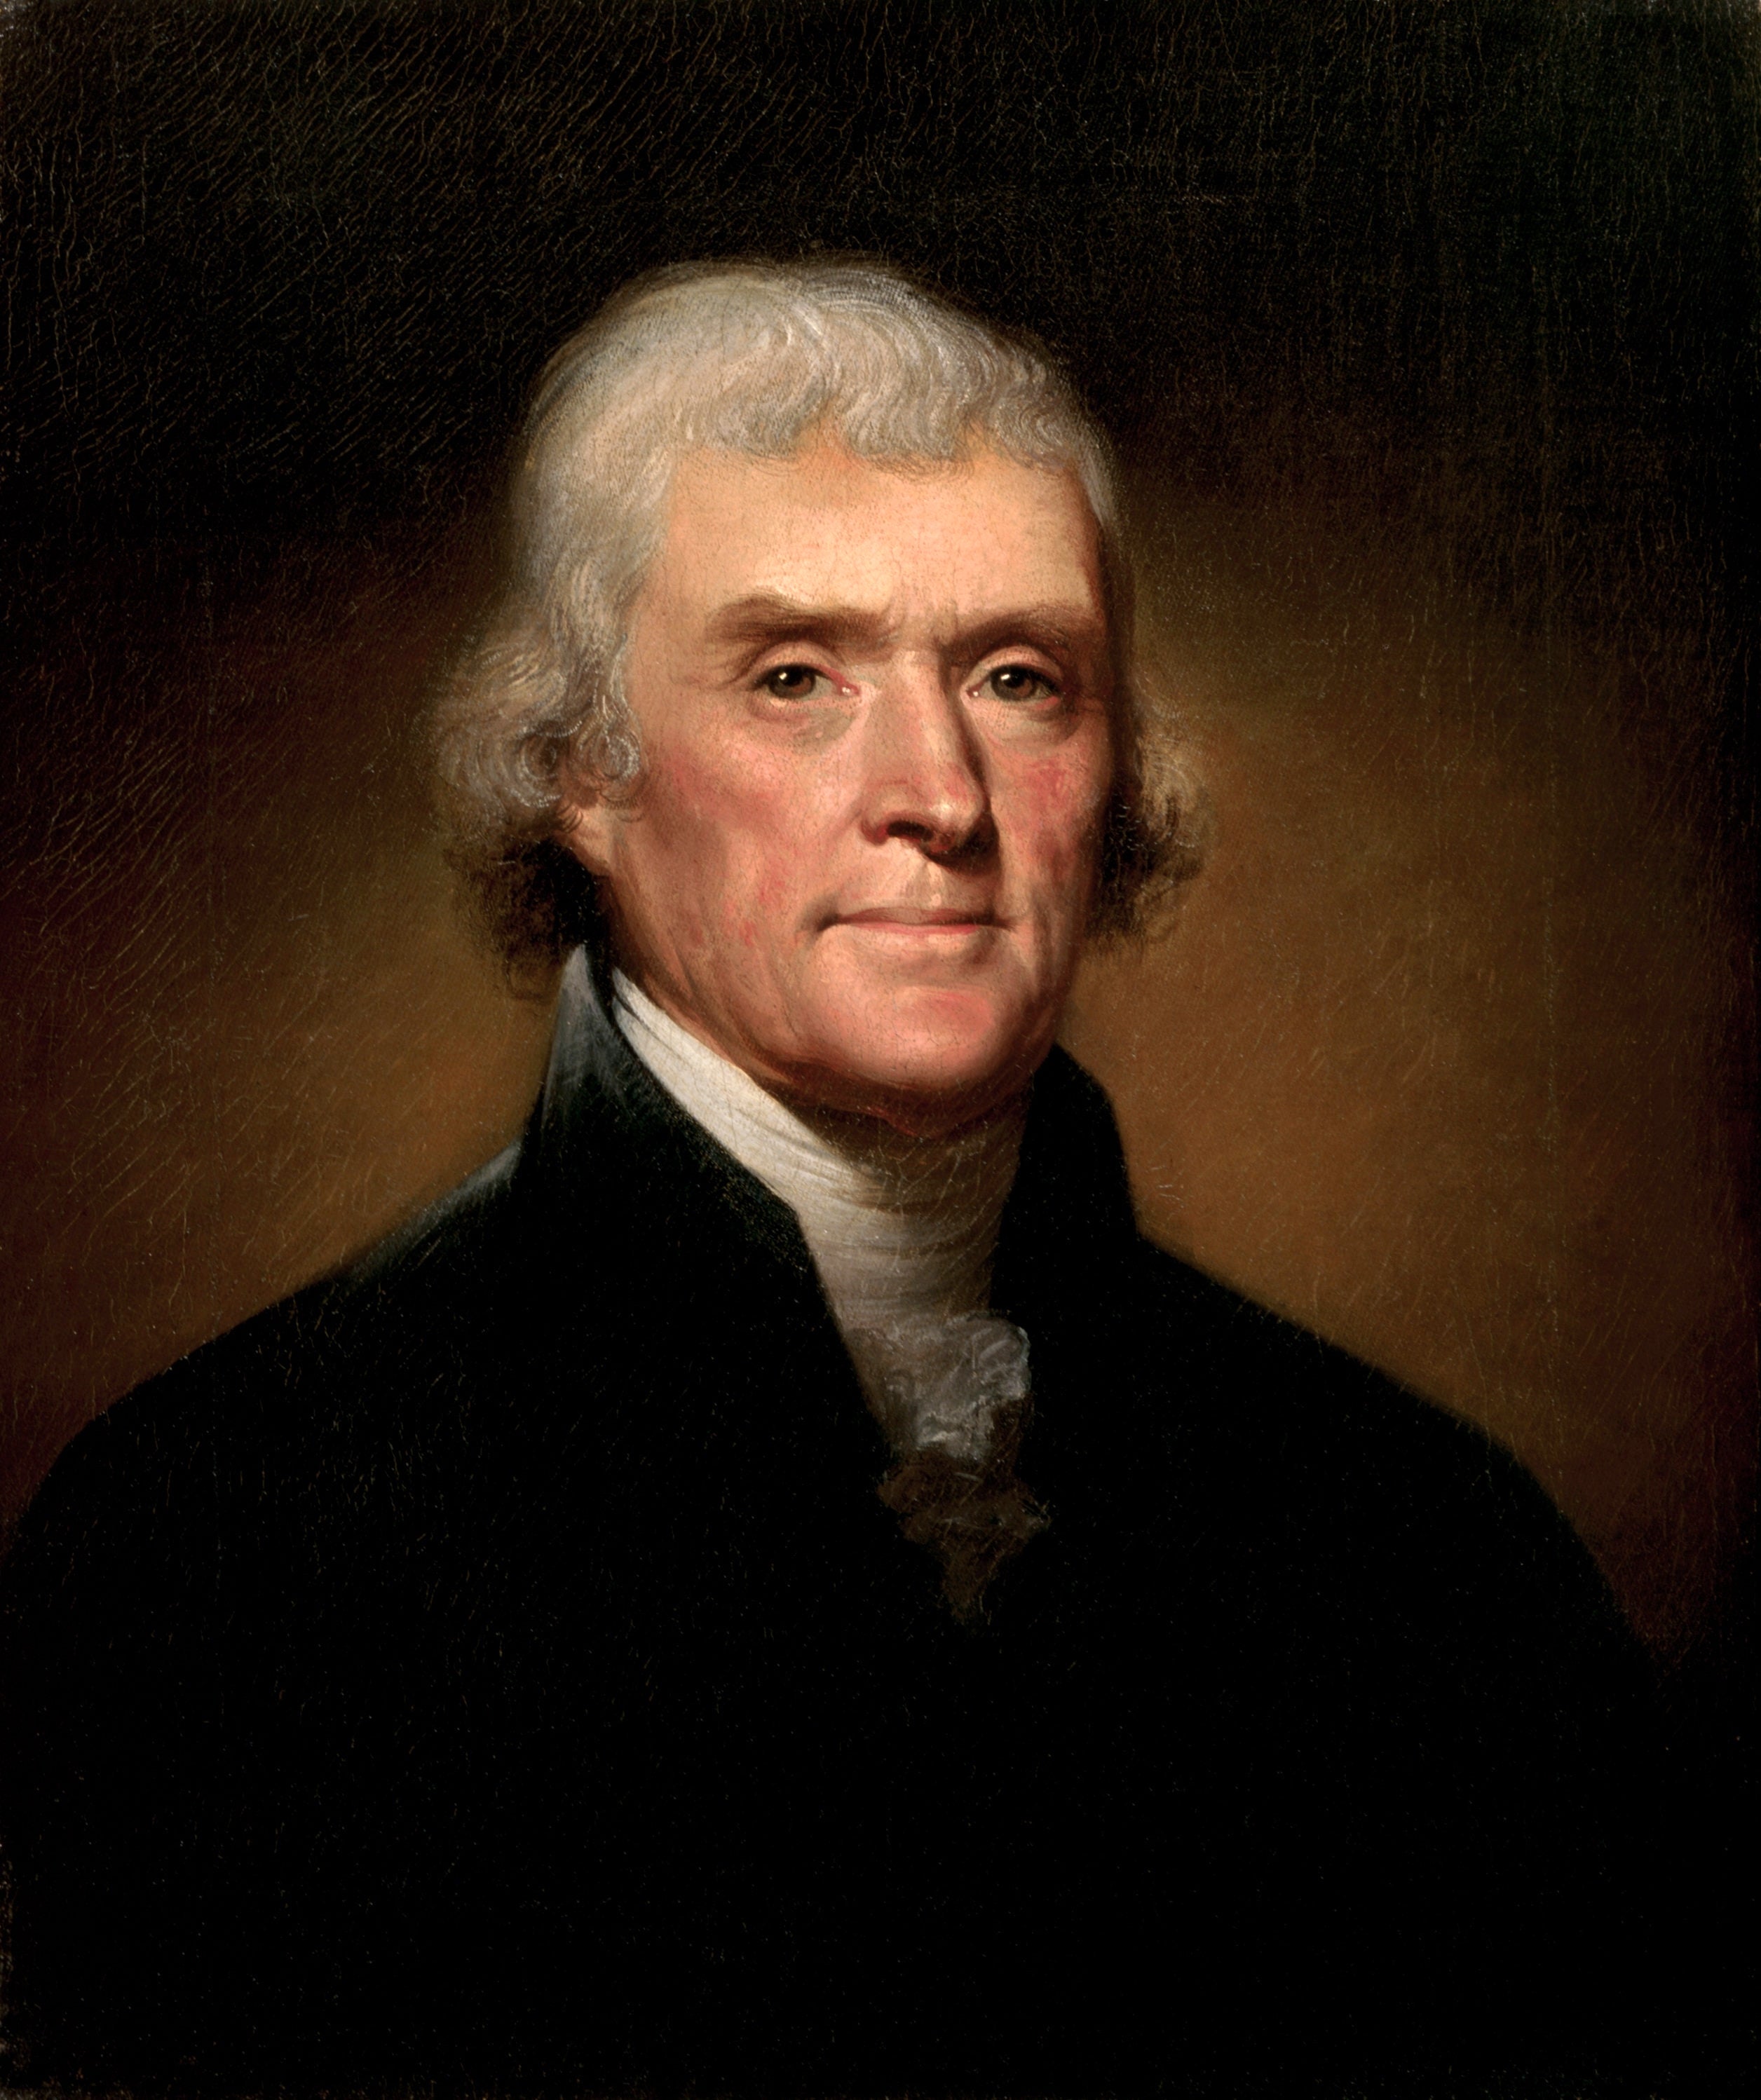 Thomas Jefferson portrait painting by Rembrandt Peale in black suit and white scarf.